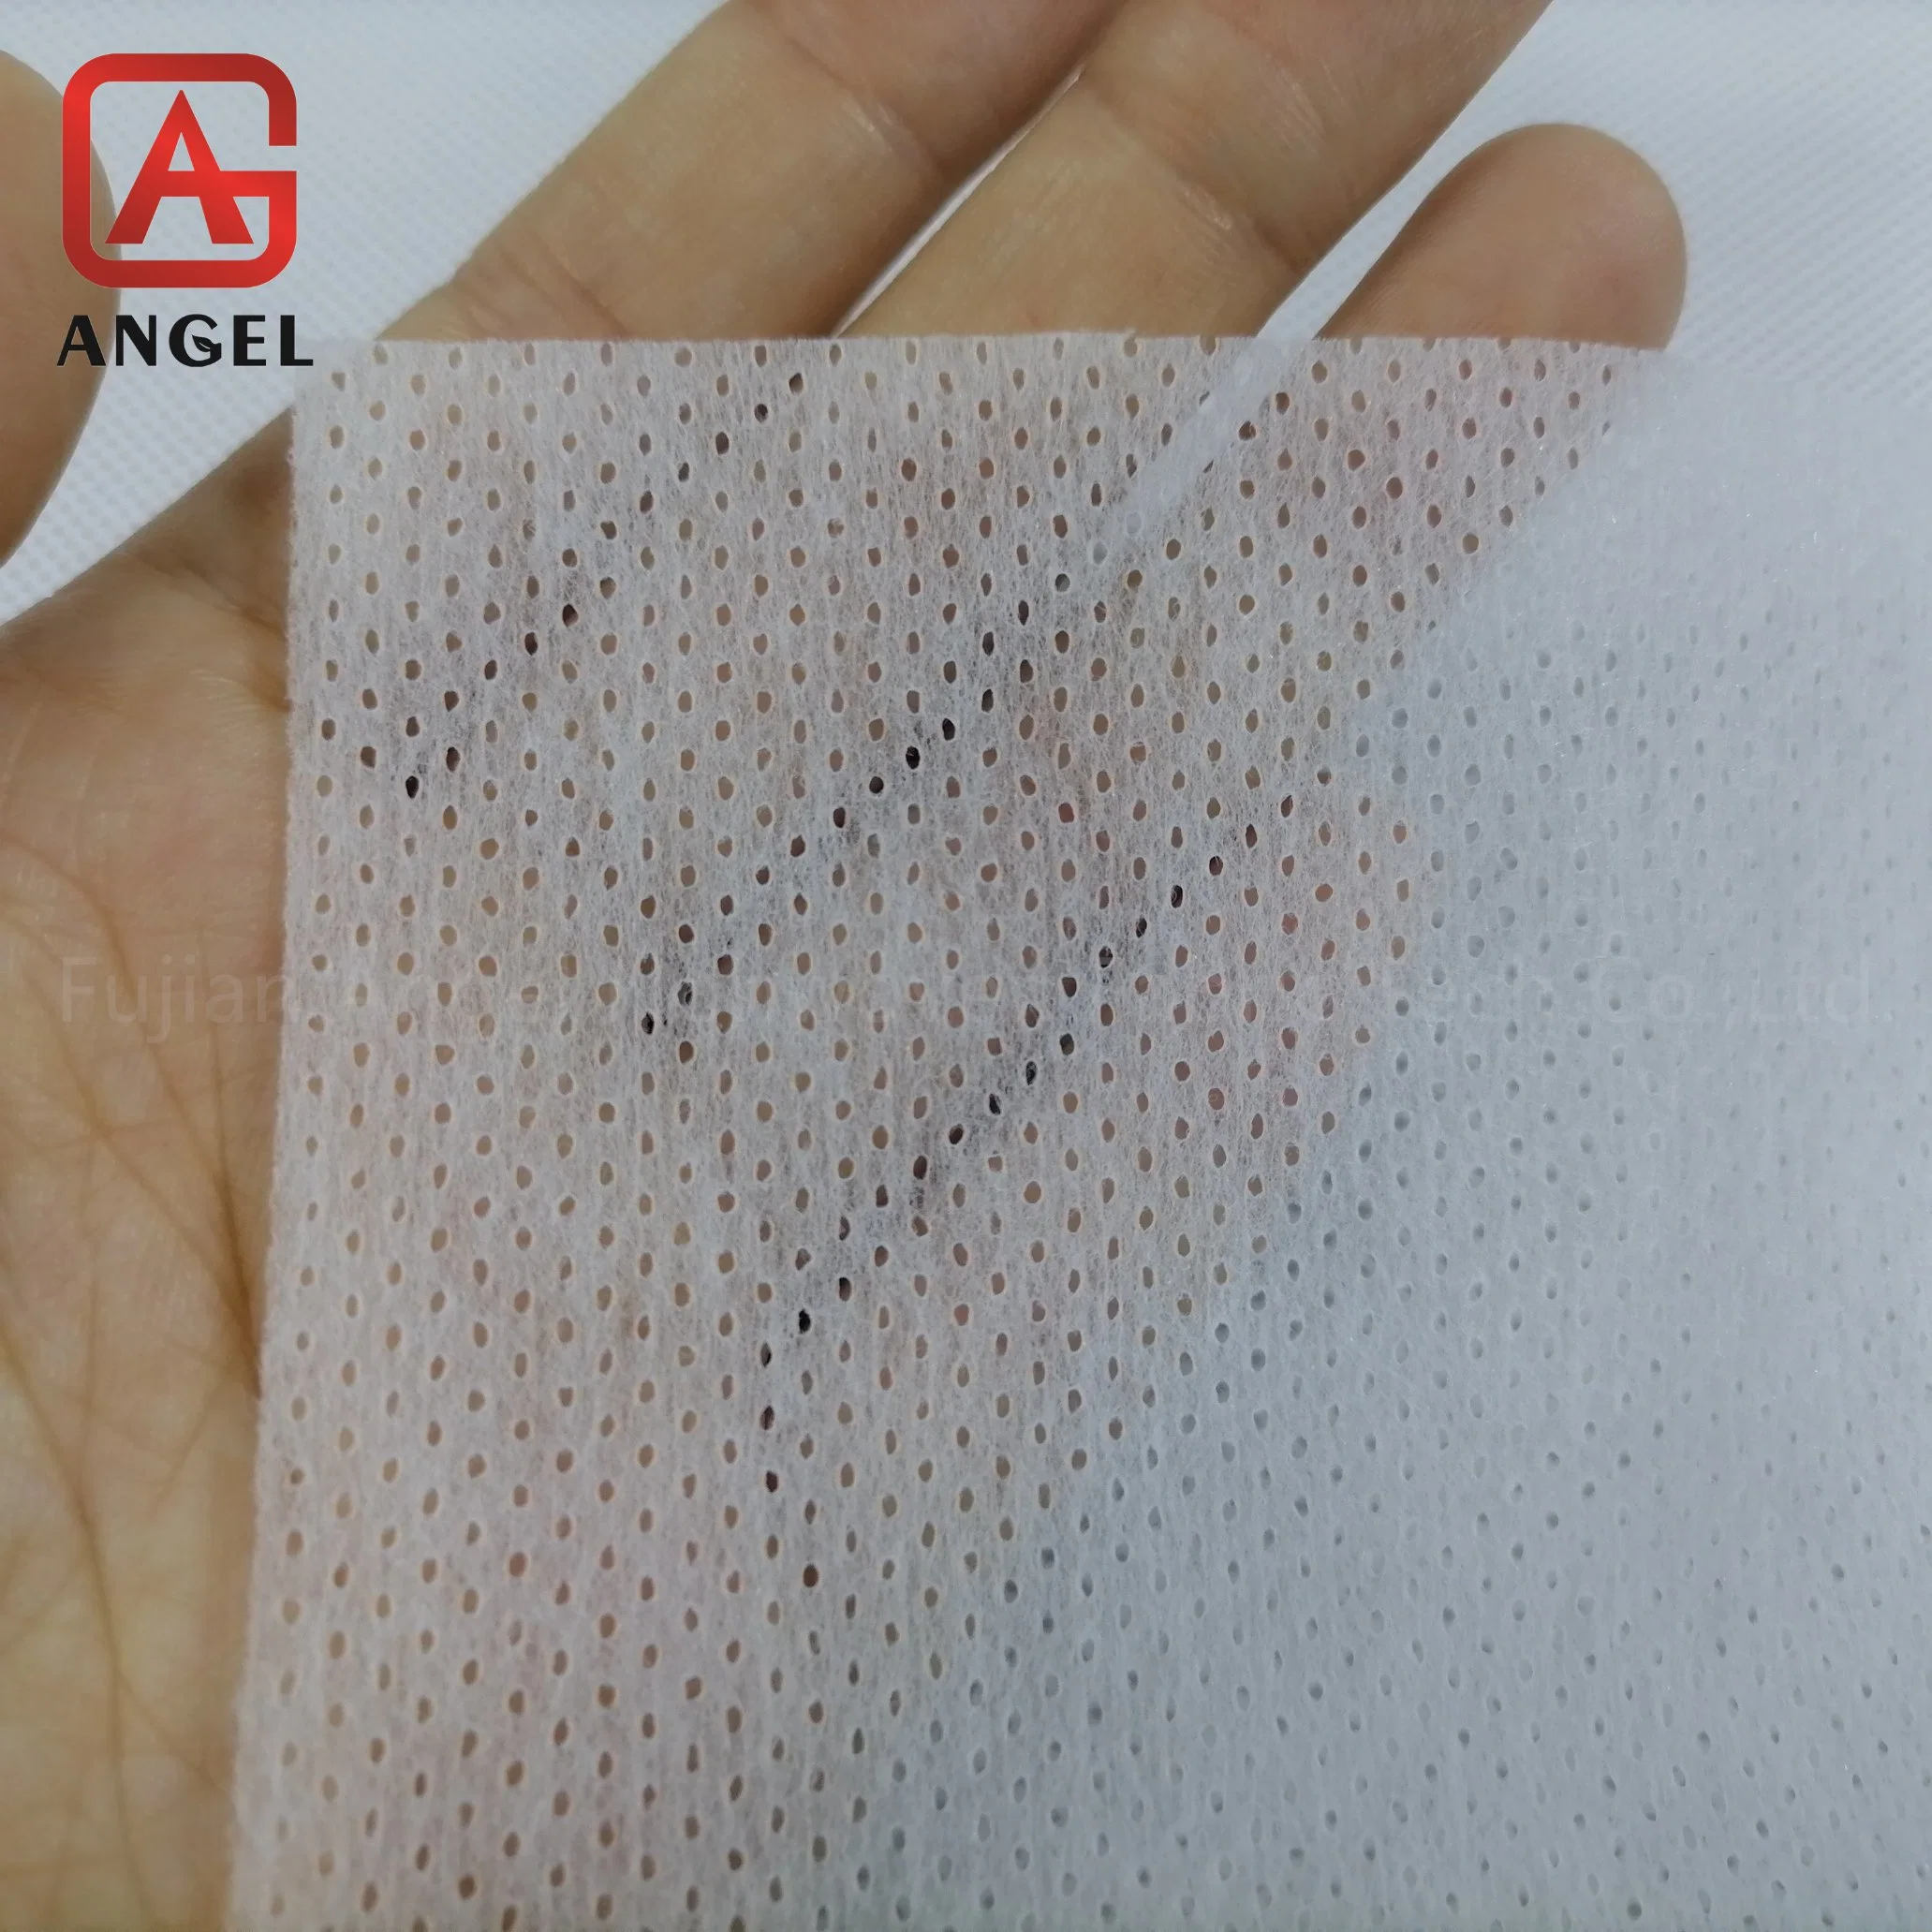 Wholesale/Supplier Adl Nonwoven Fabric for Diaper and Sanitary Napkin